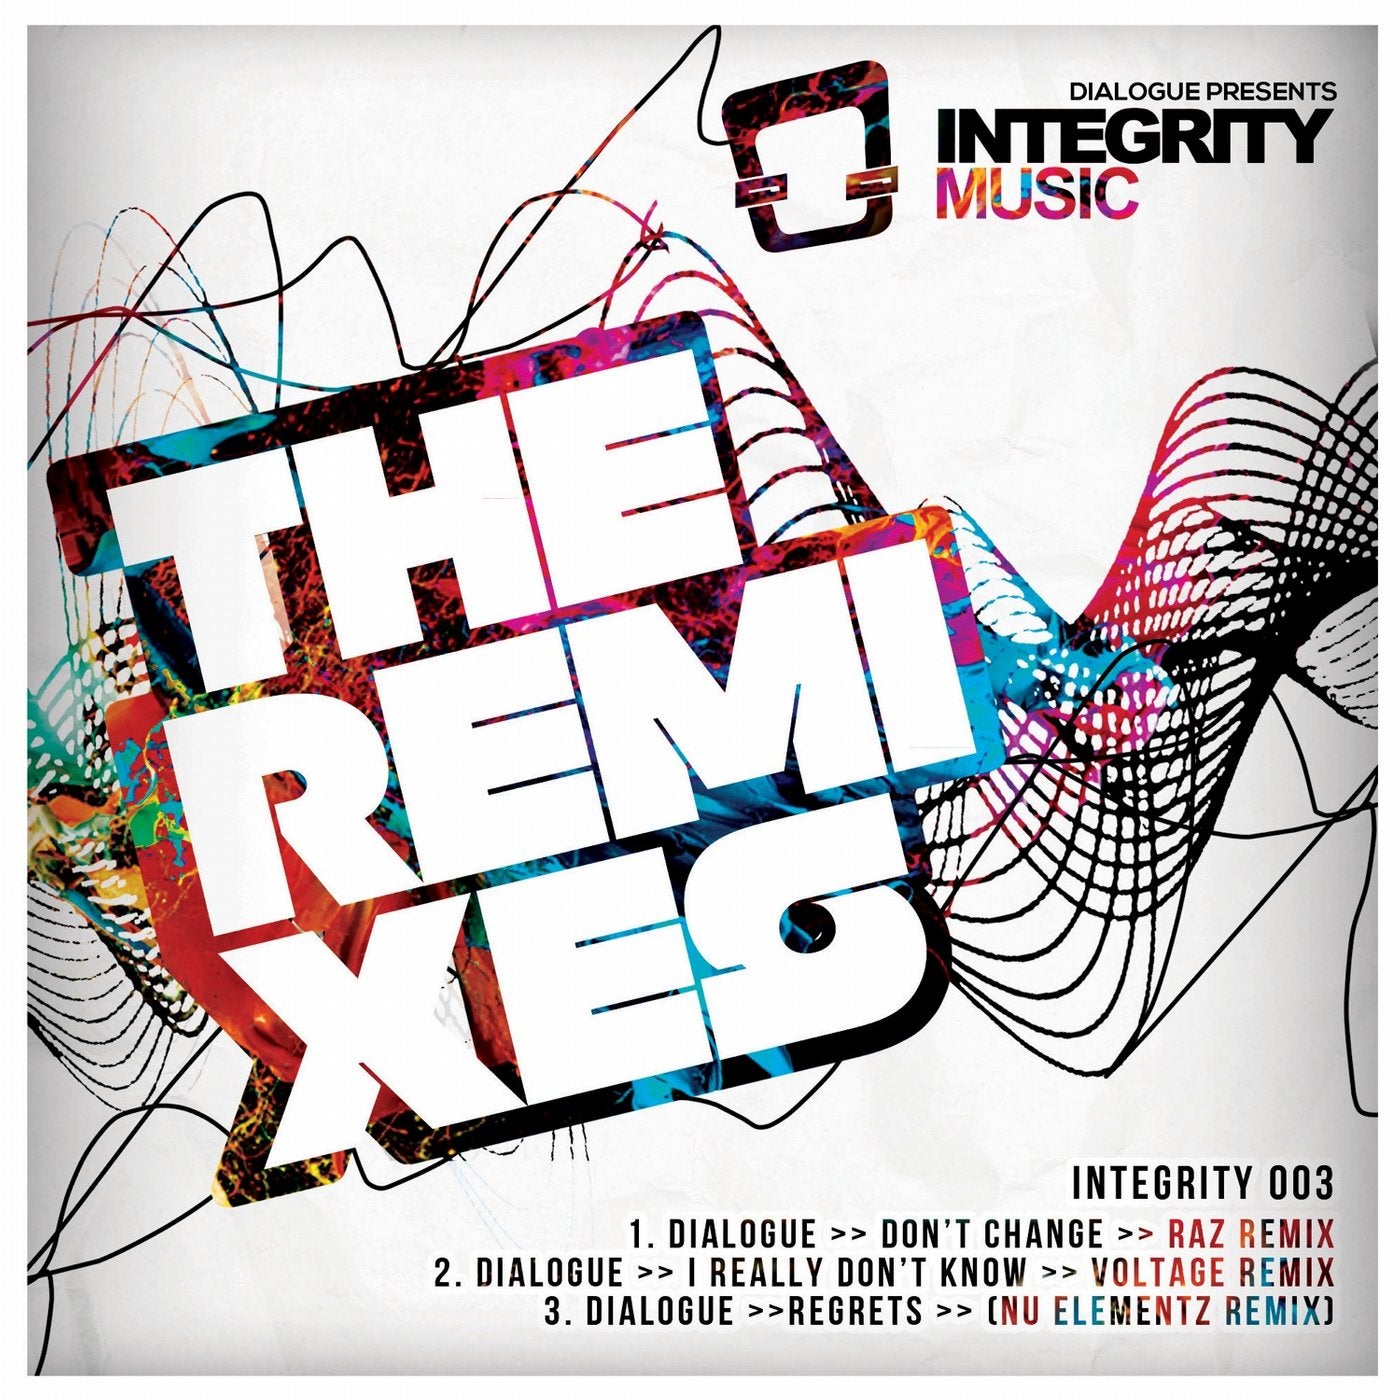 Integrity - The Remix's